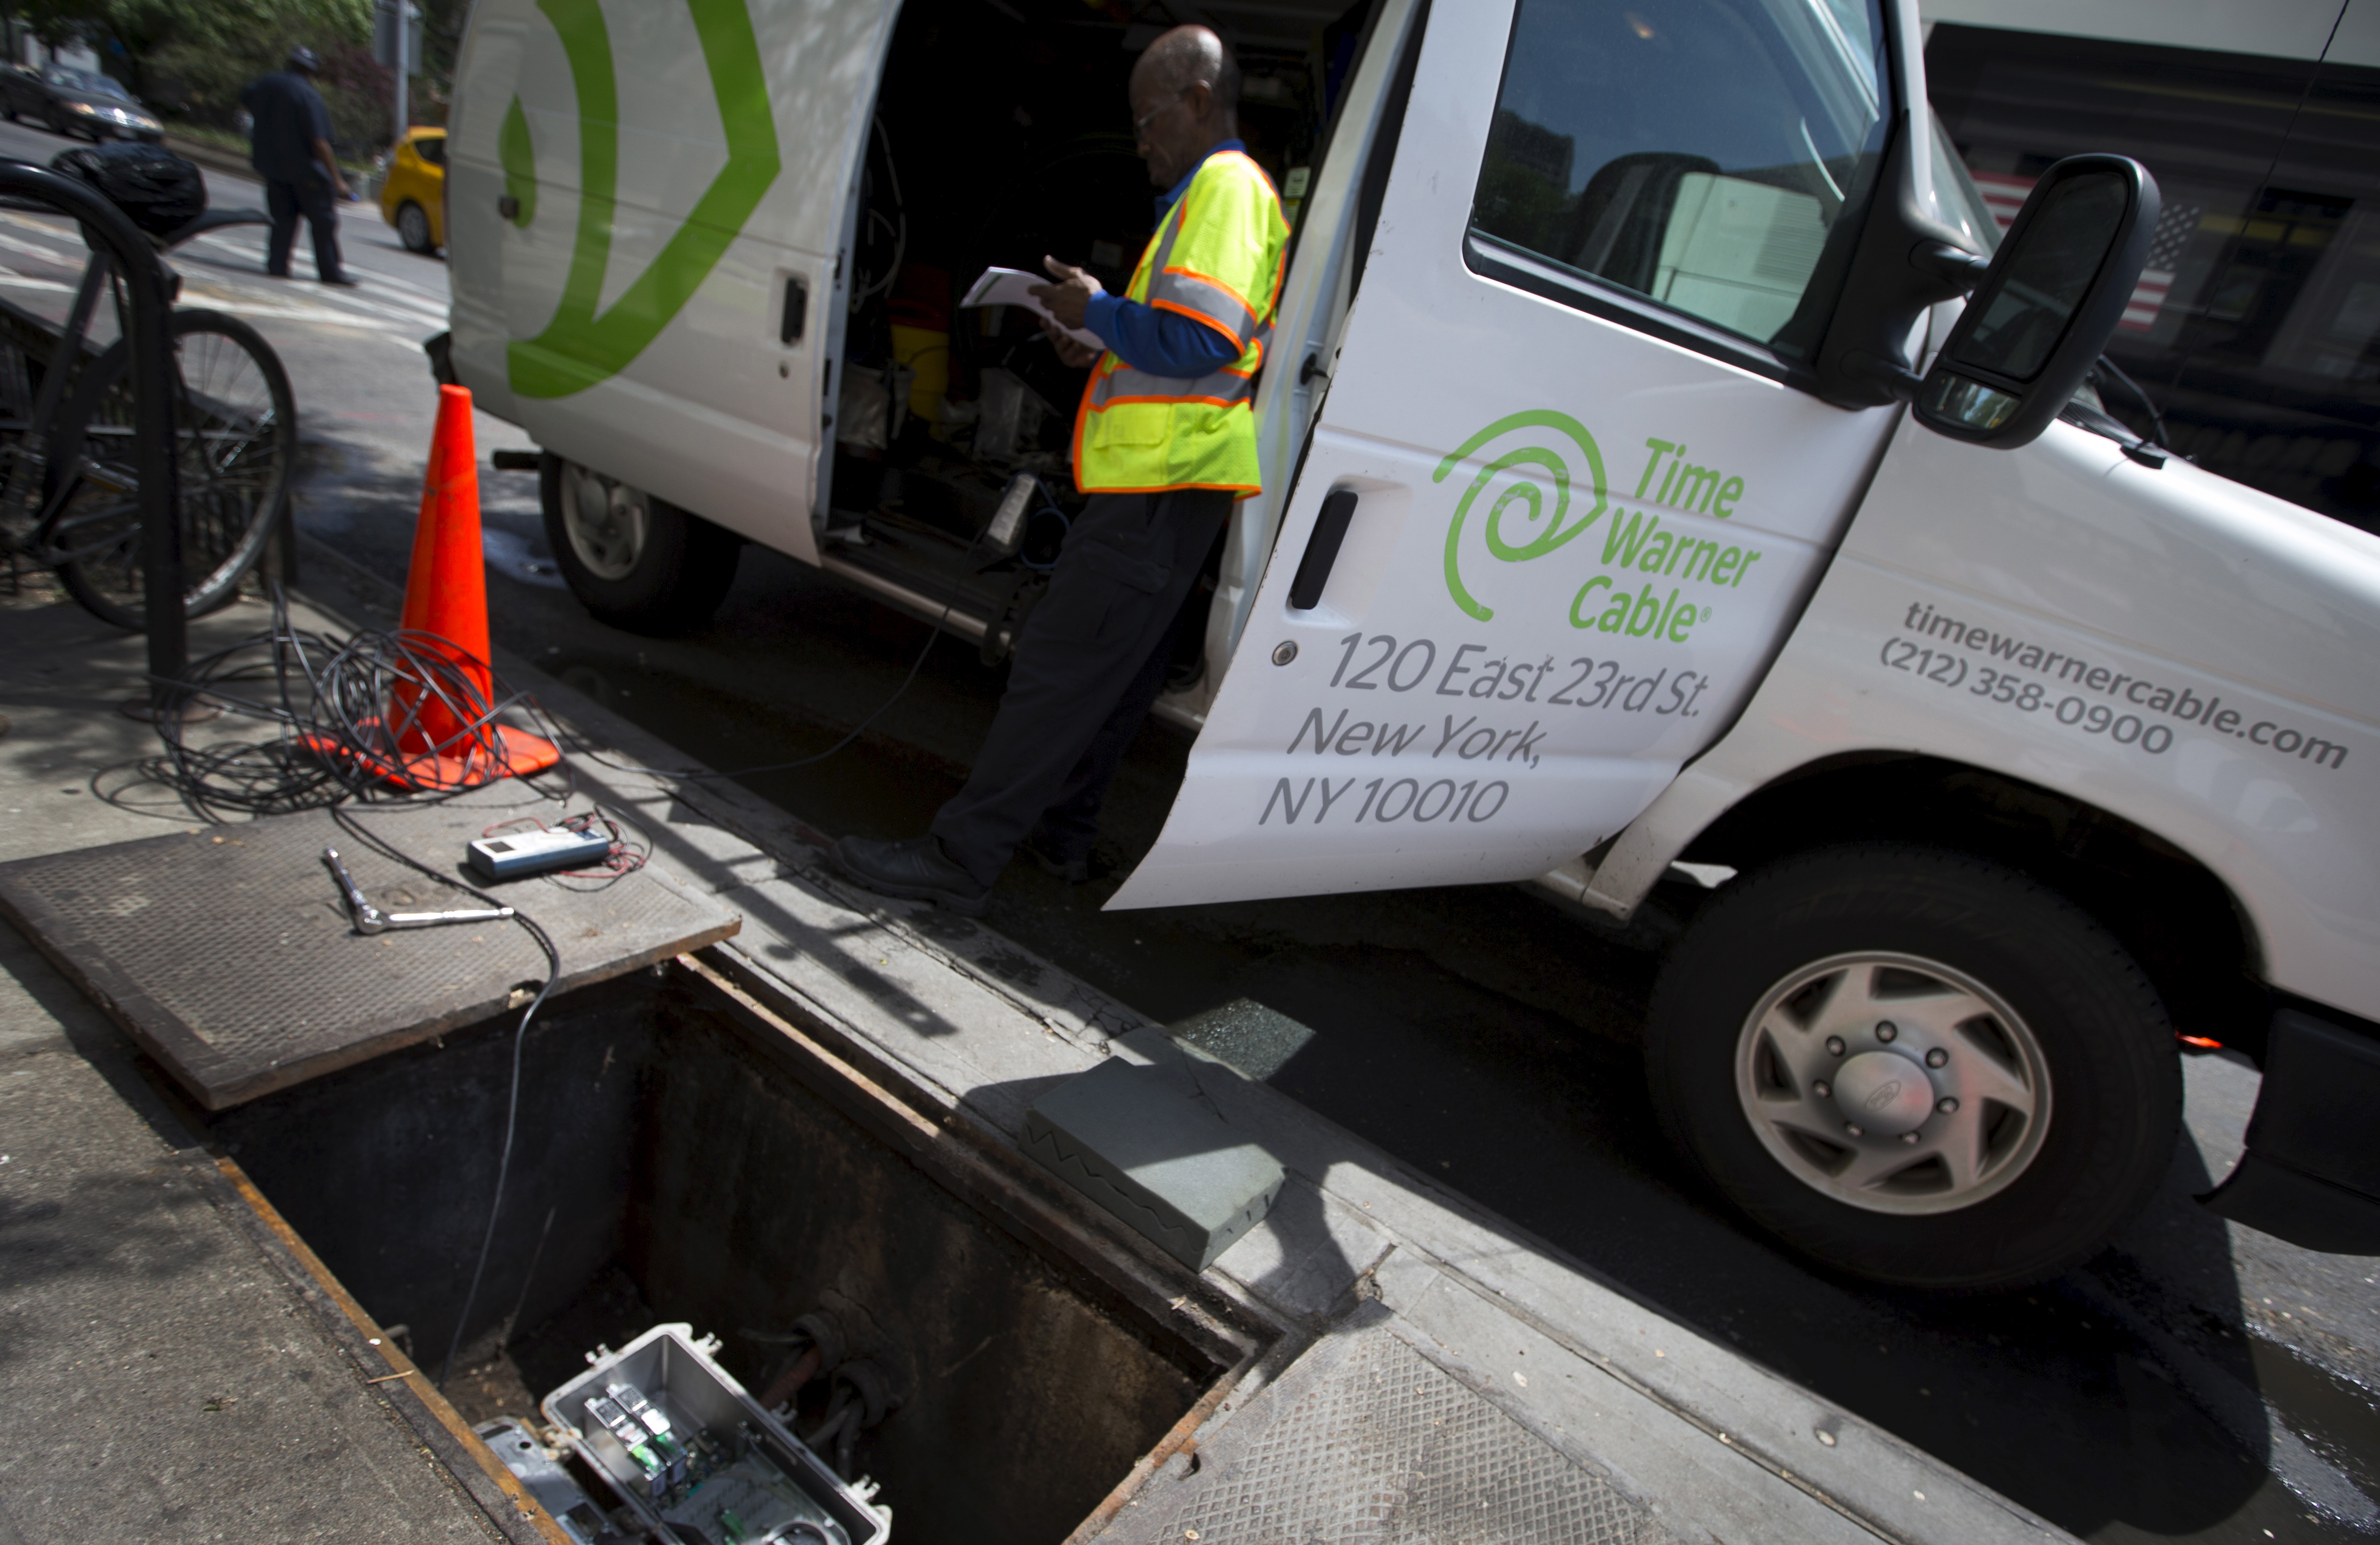 A Time Warner Cable service technician works on cable service from a van parked on the Upper West side of the Manhattan borough of New York City